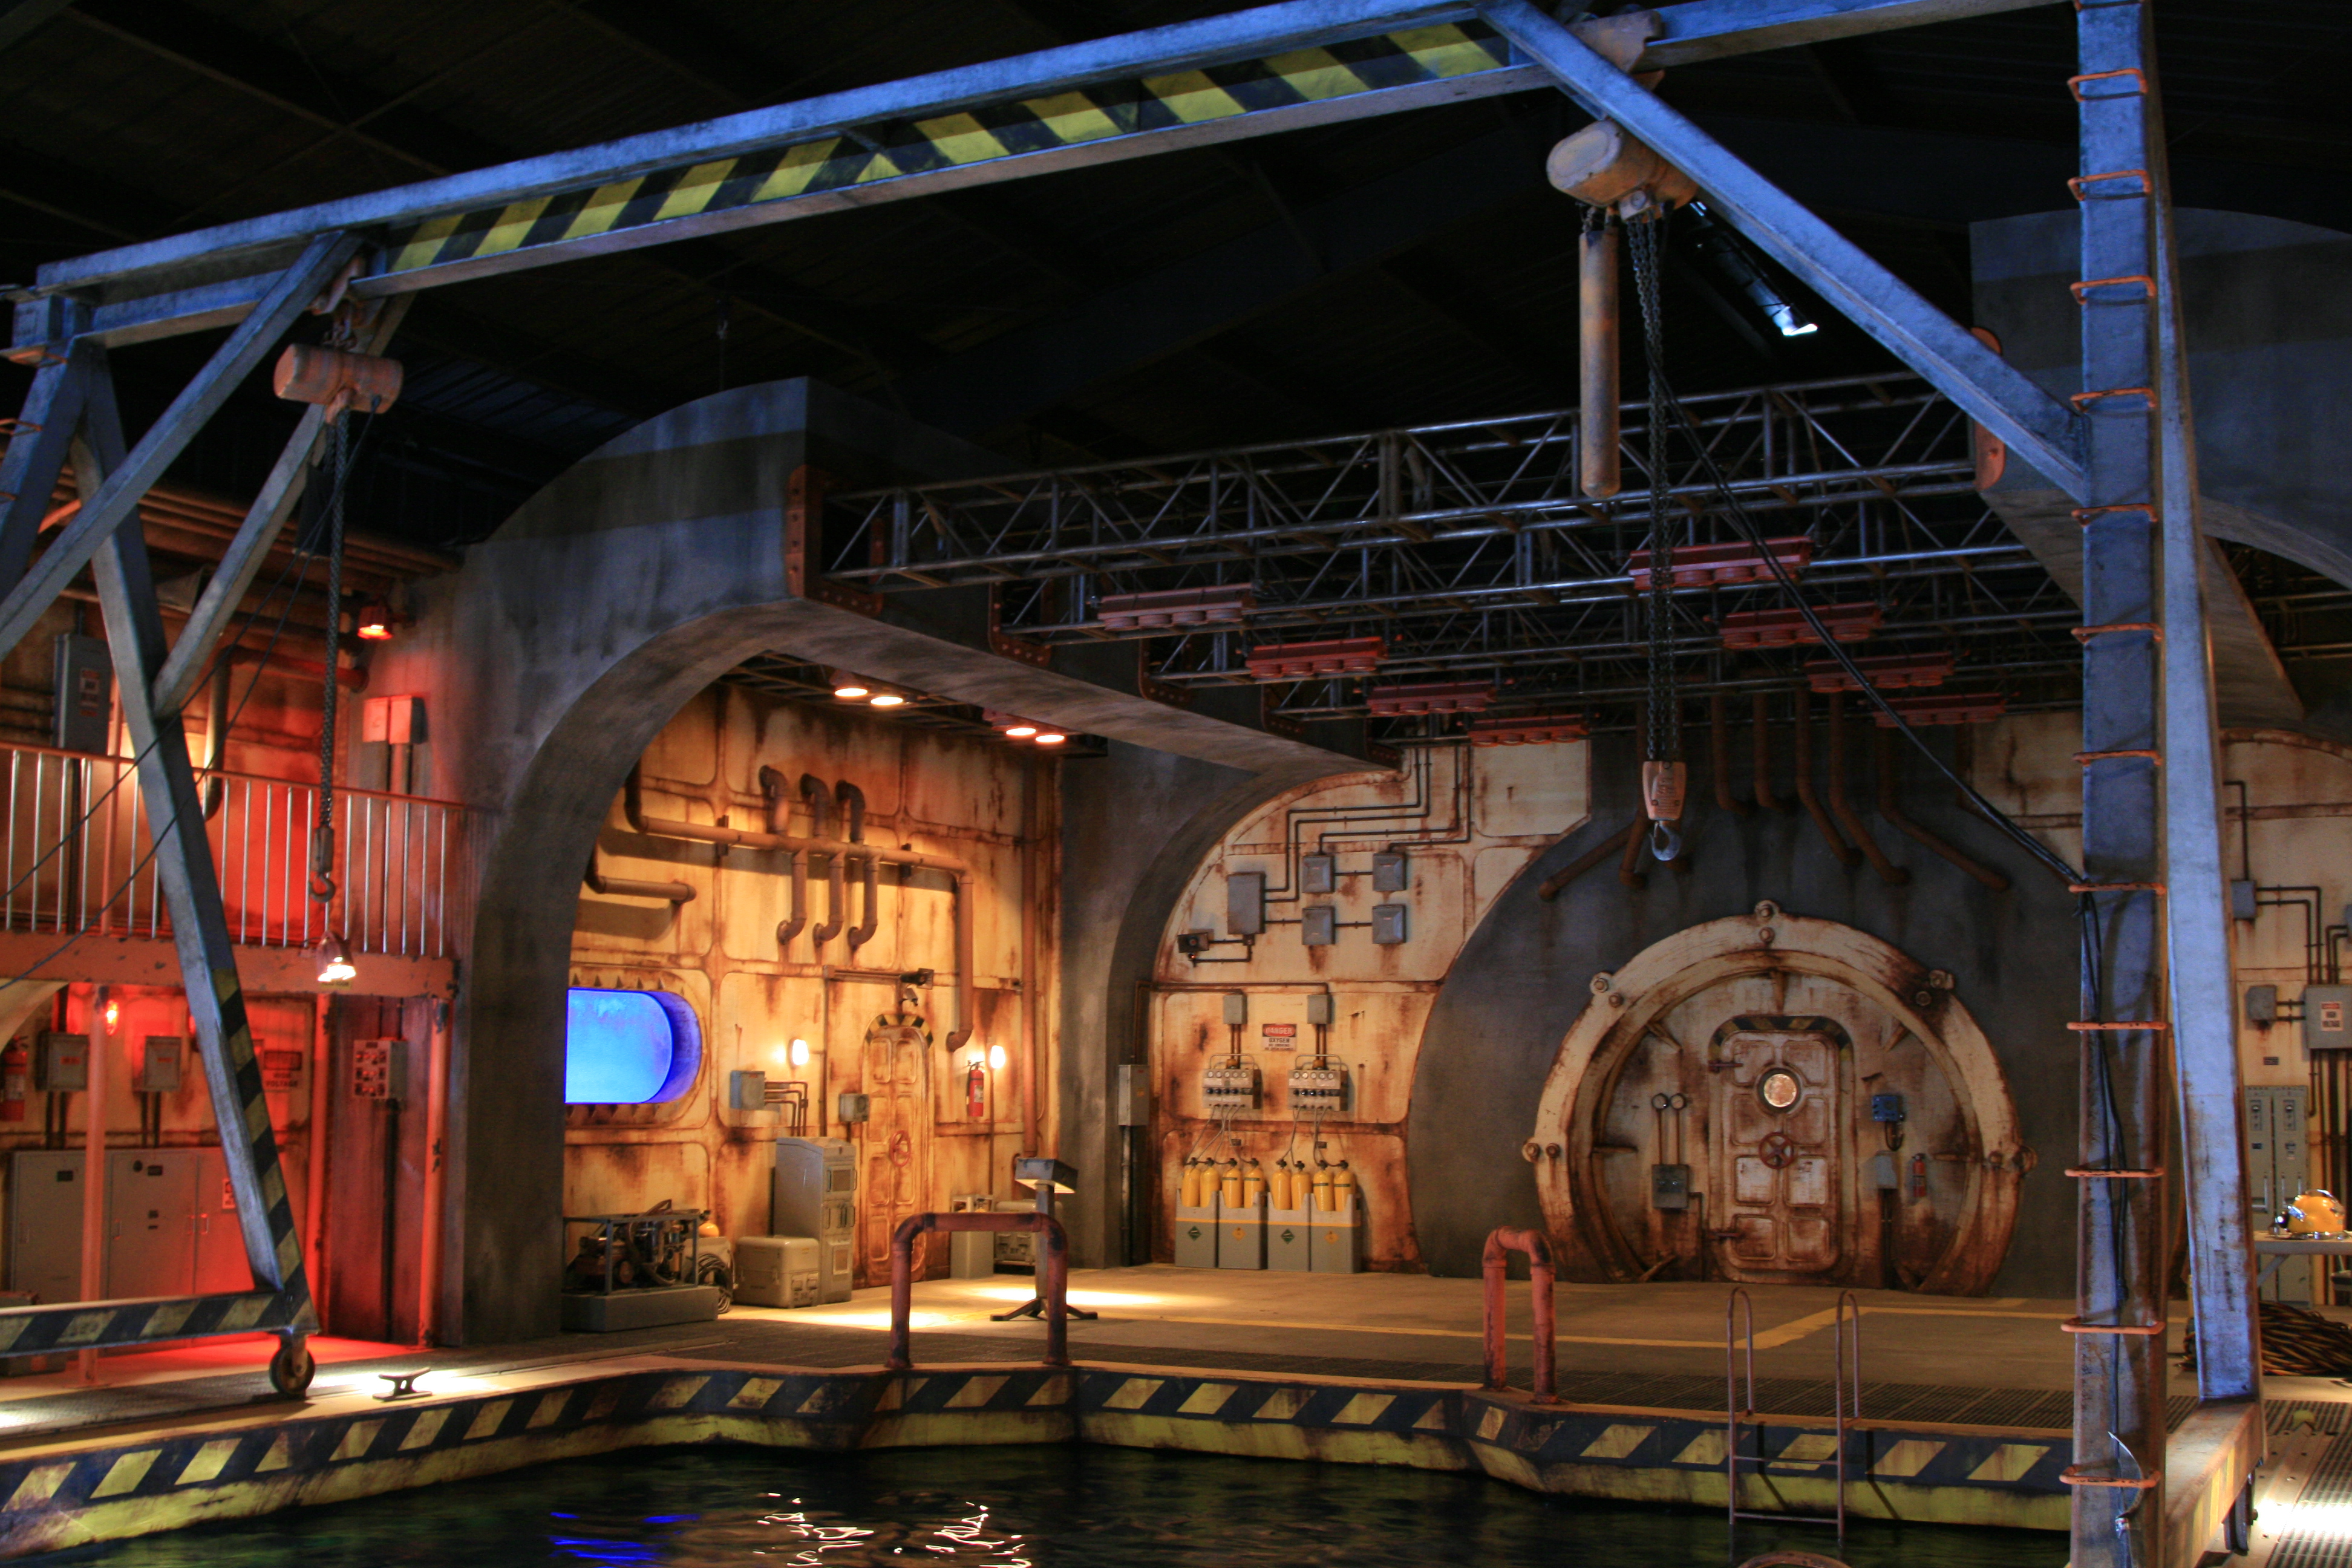 The Looking Glass underwater station, built on stage for 